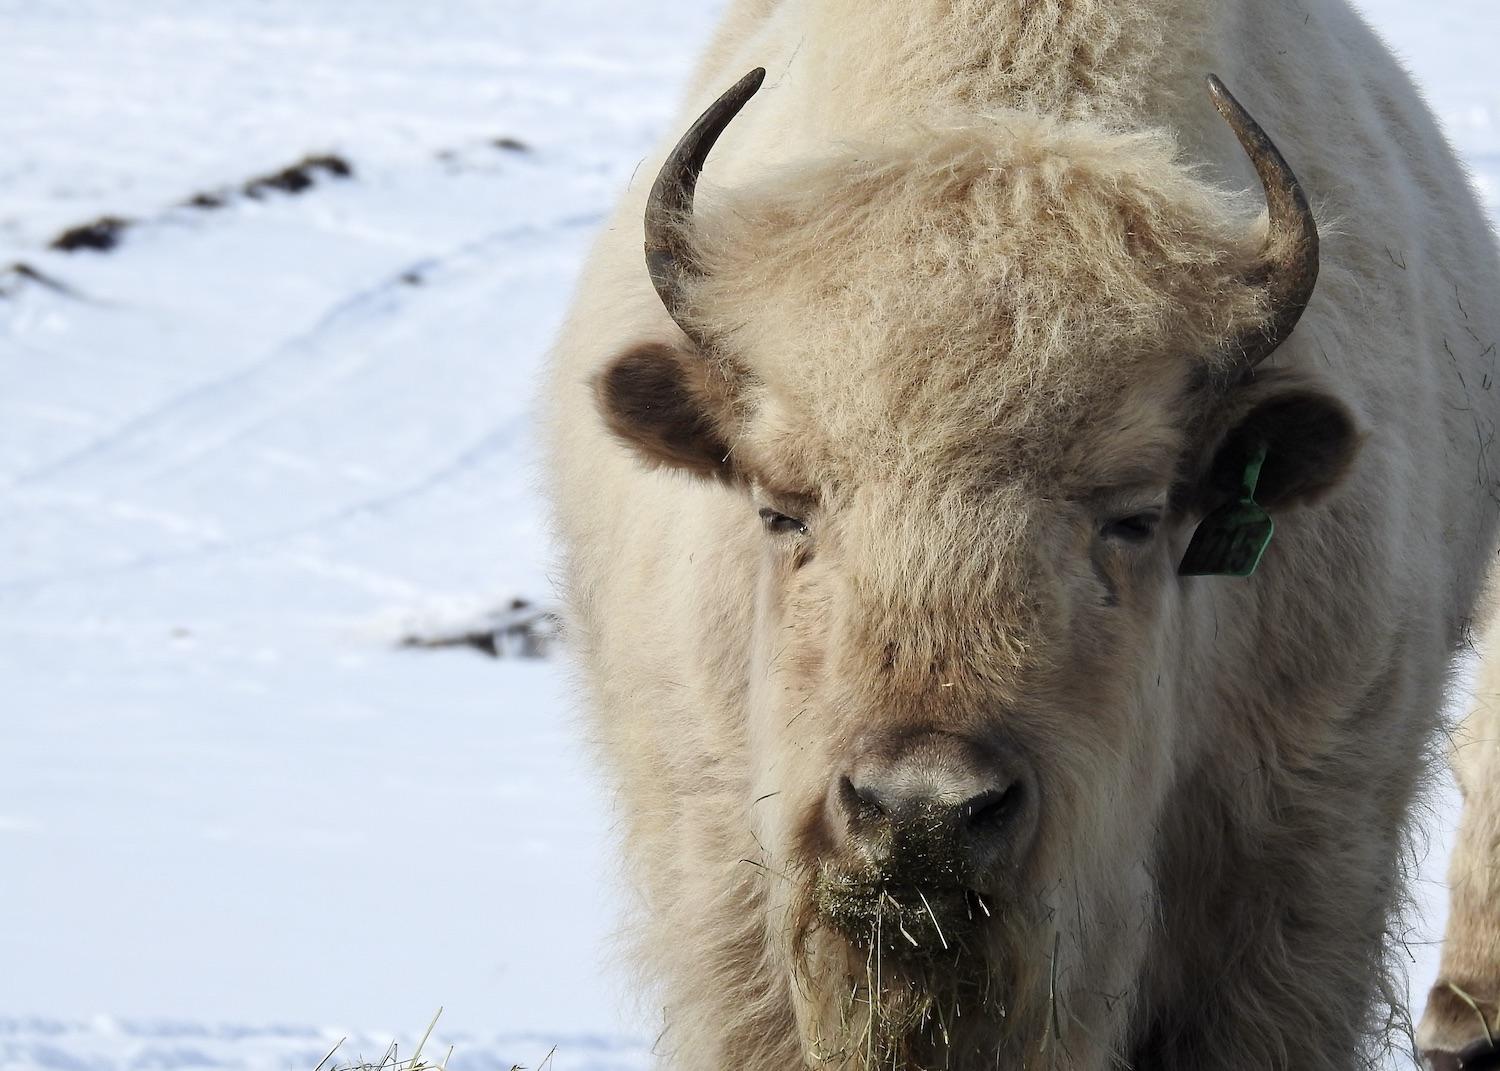 A white bison spotted during a guided tour by vehicle of the Visions, Hopes and Dreams at Métis Crossing Wildlife Park.